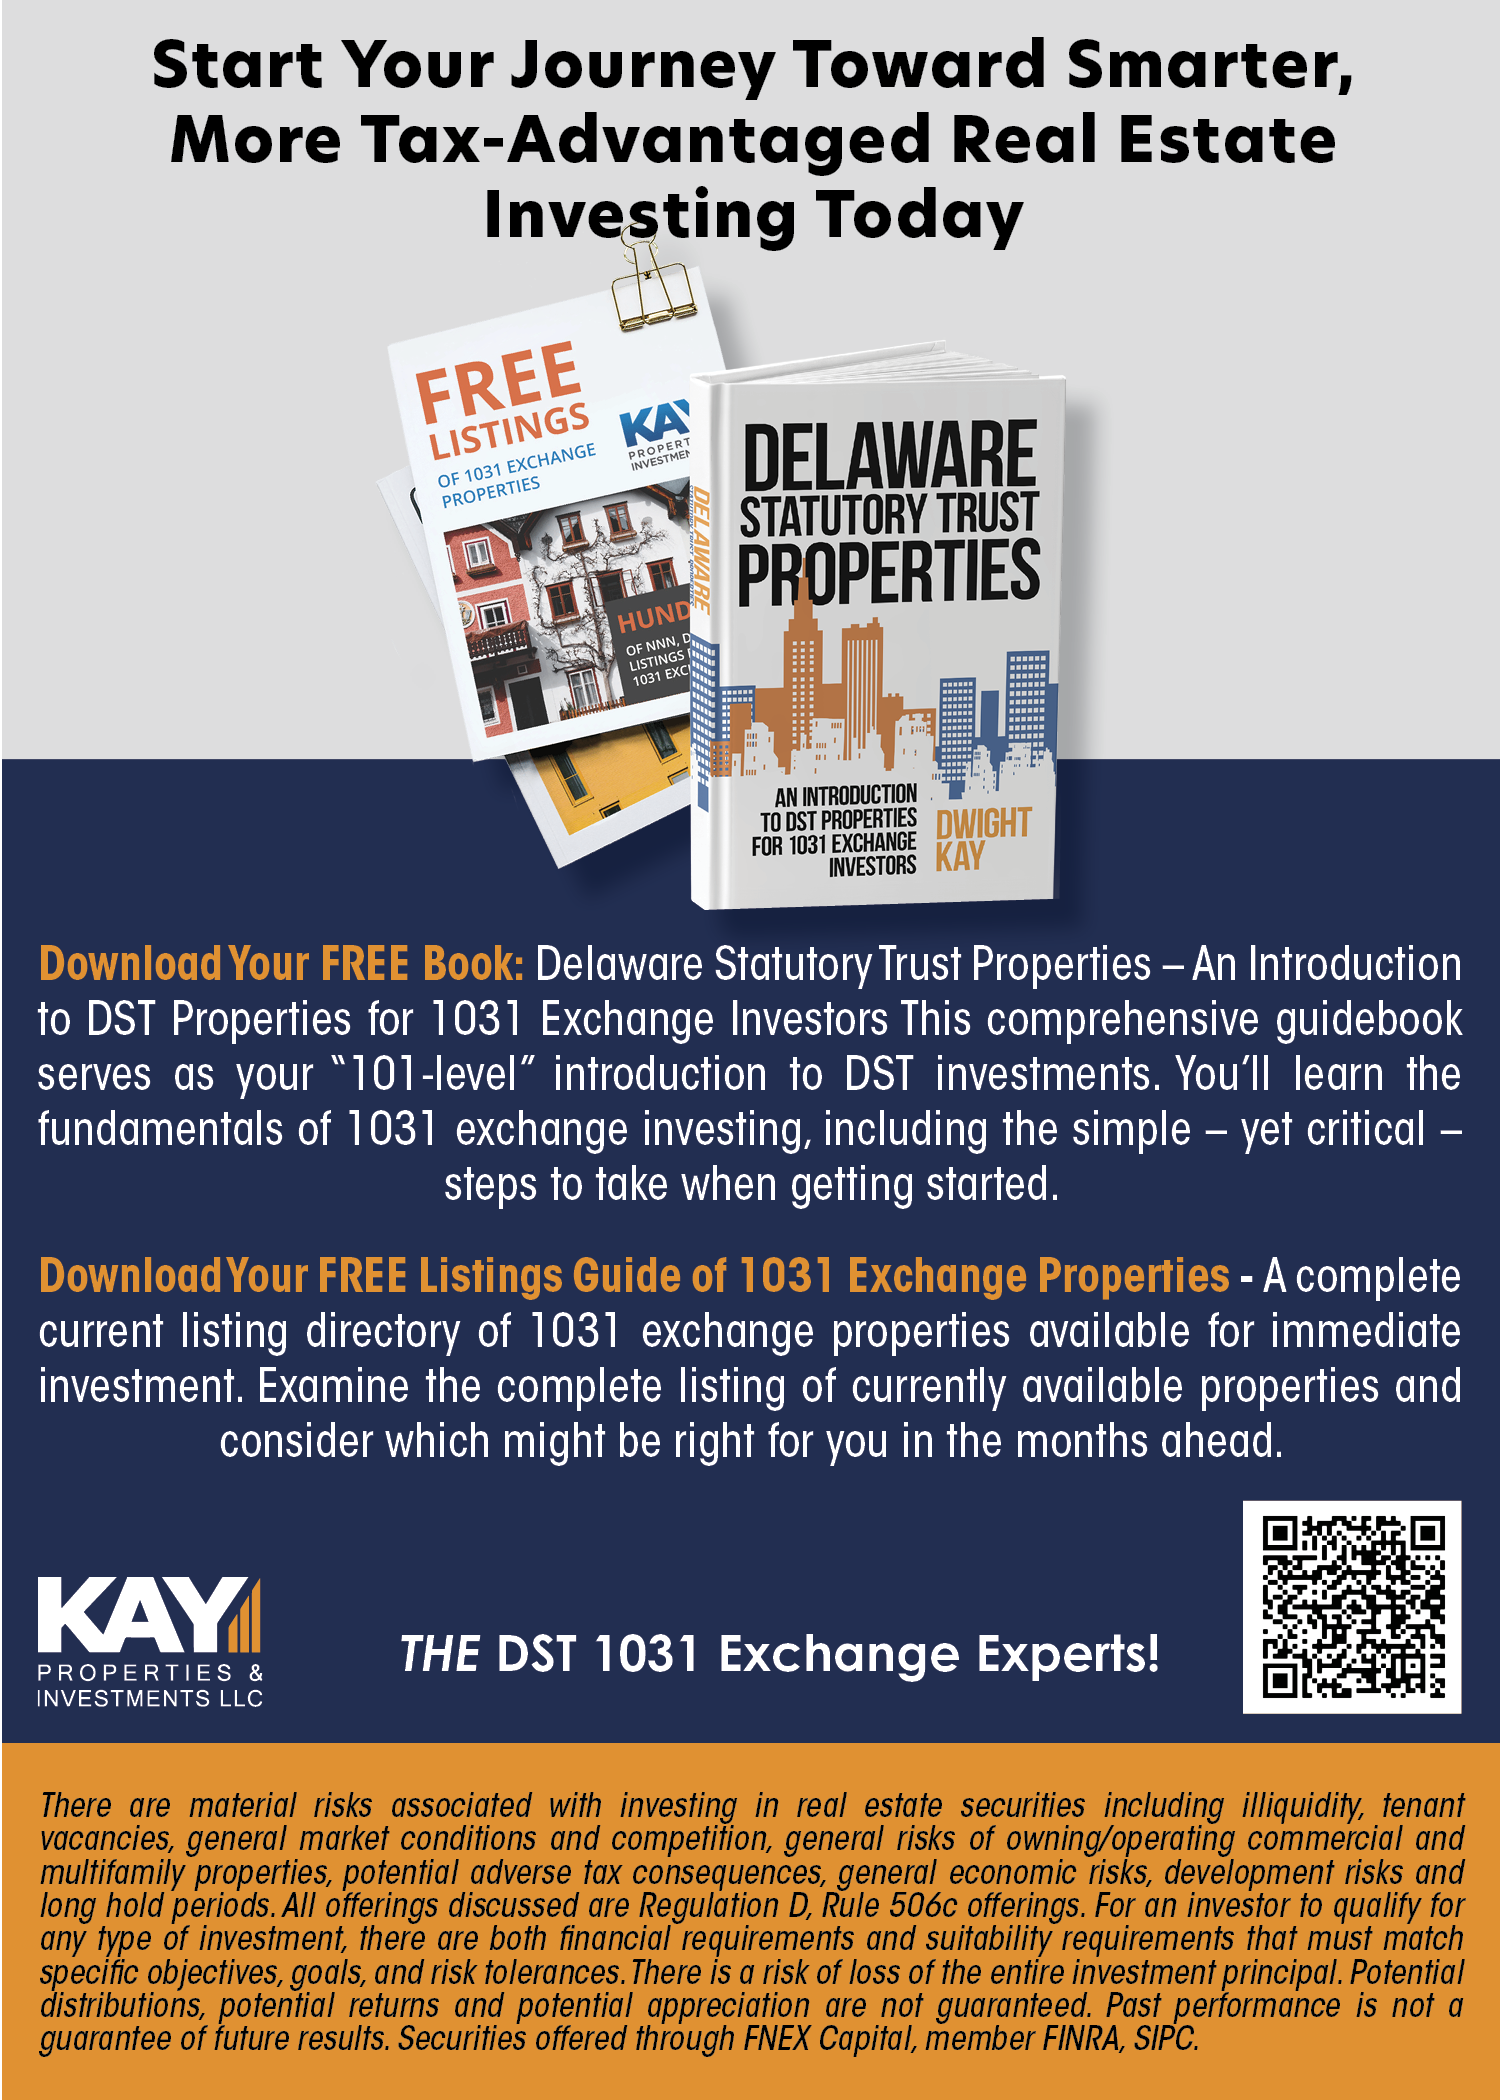 Image of DST book and free magazine for real estate investing